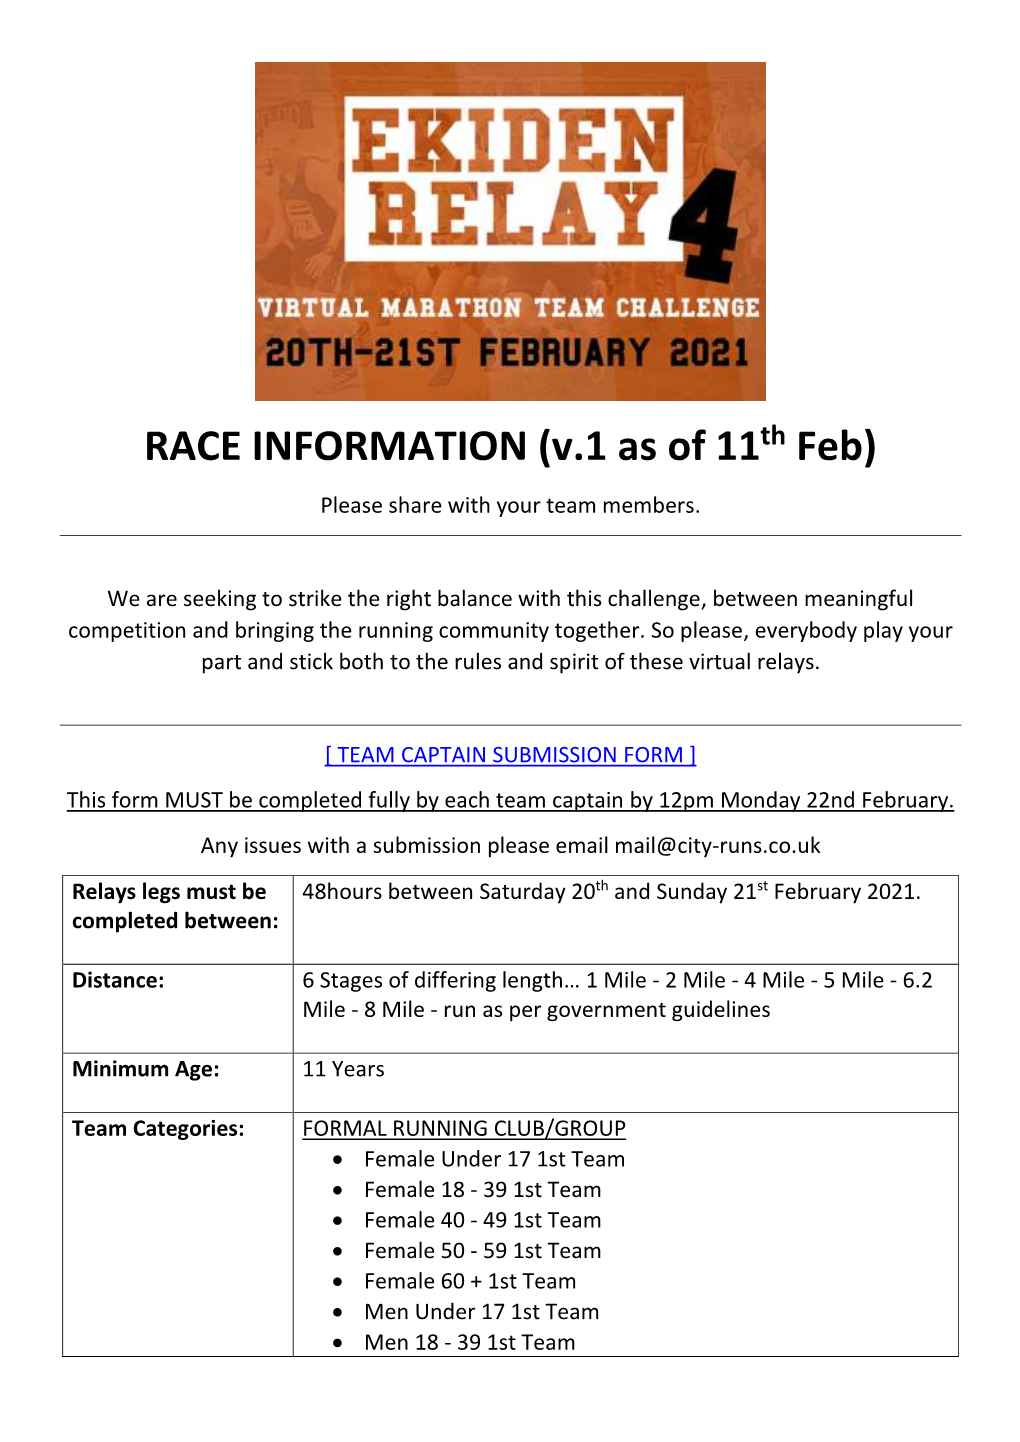 RACE INFORMATION (V.1 As of 11Th Feb) Please Share with Your Team Members